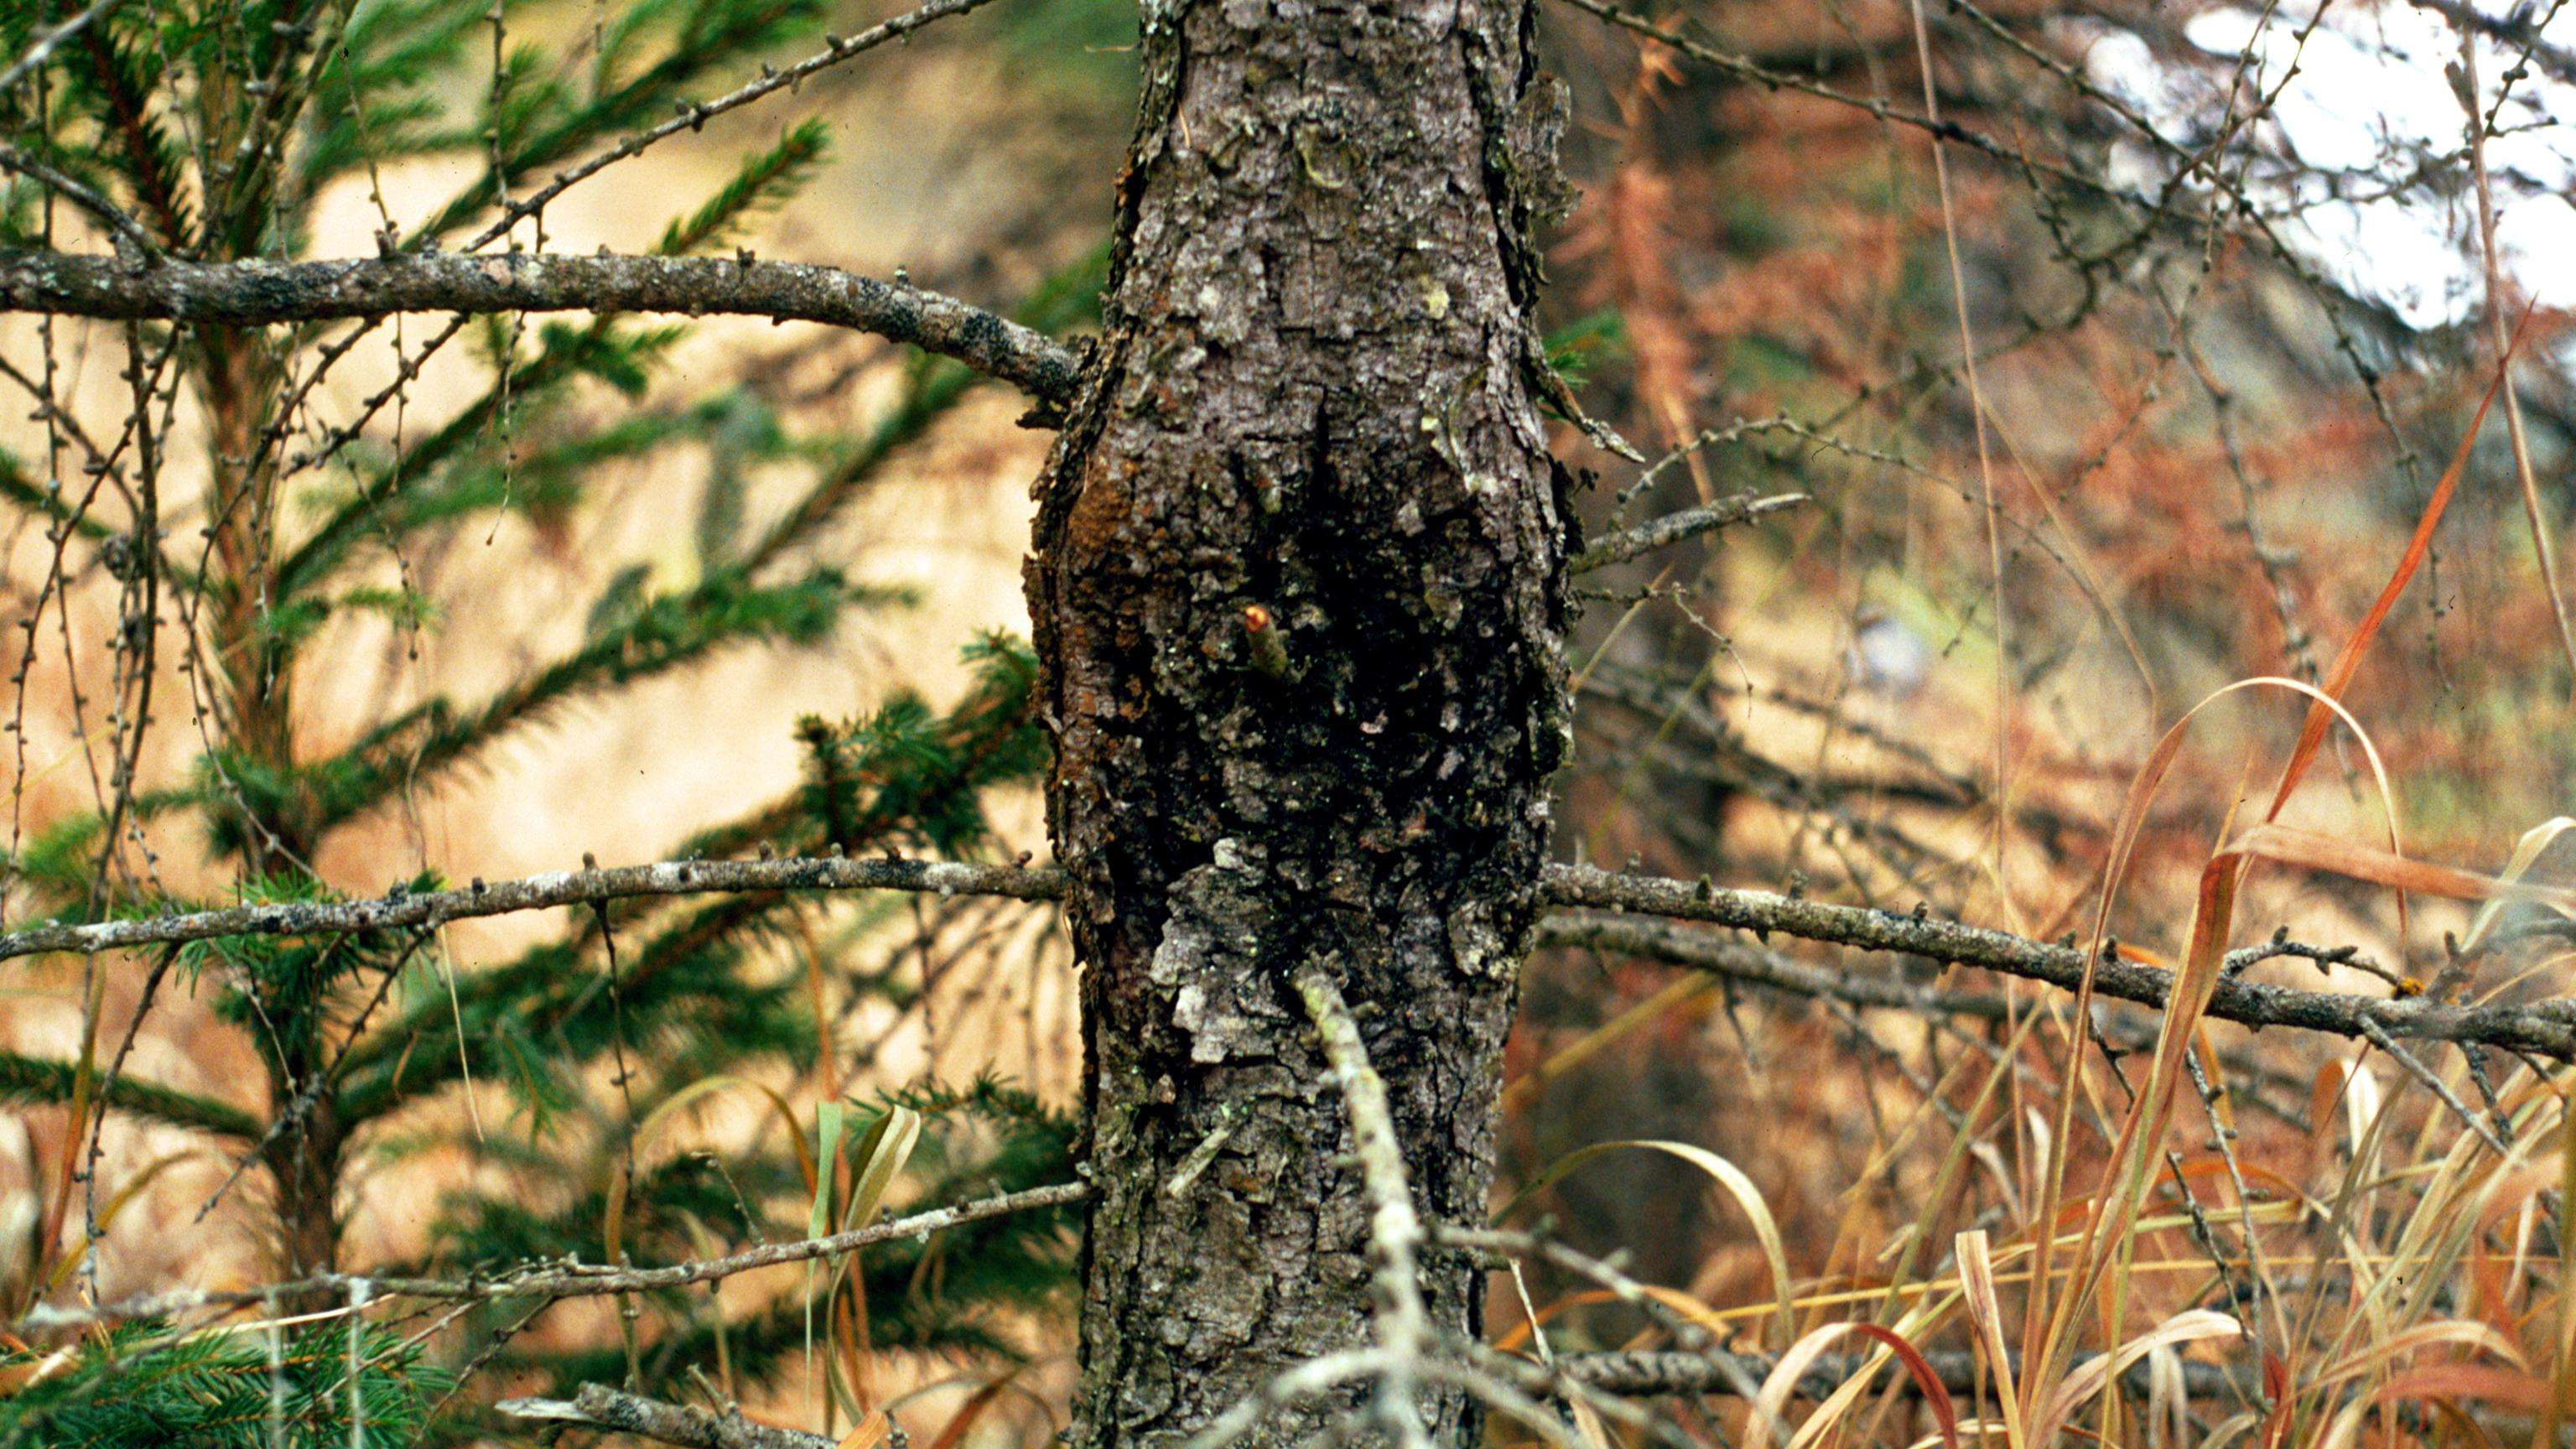 Large canker lesion on the trunk of a larch tree.